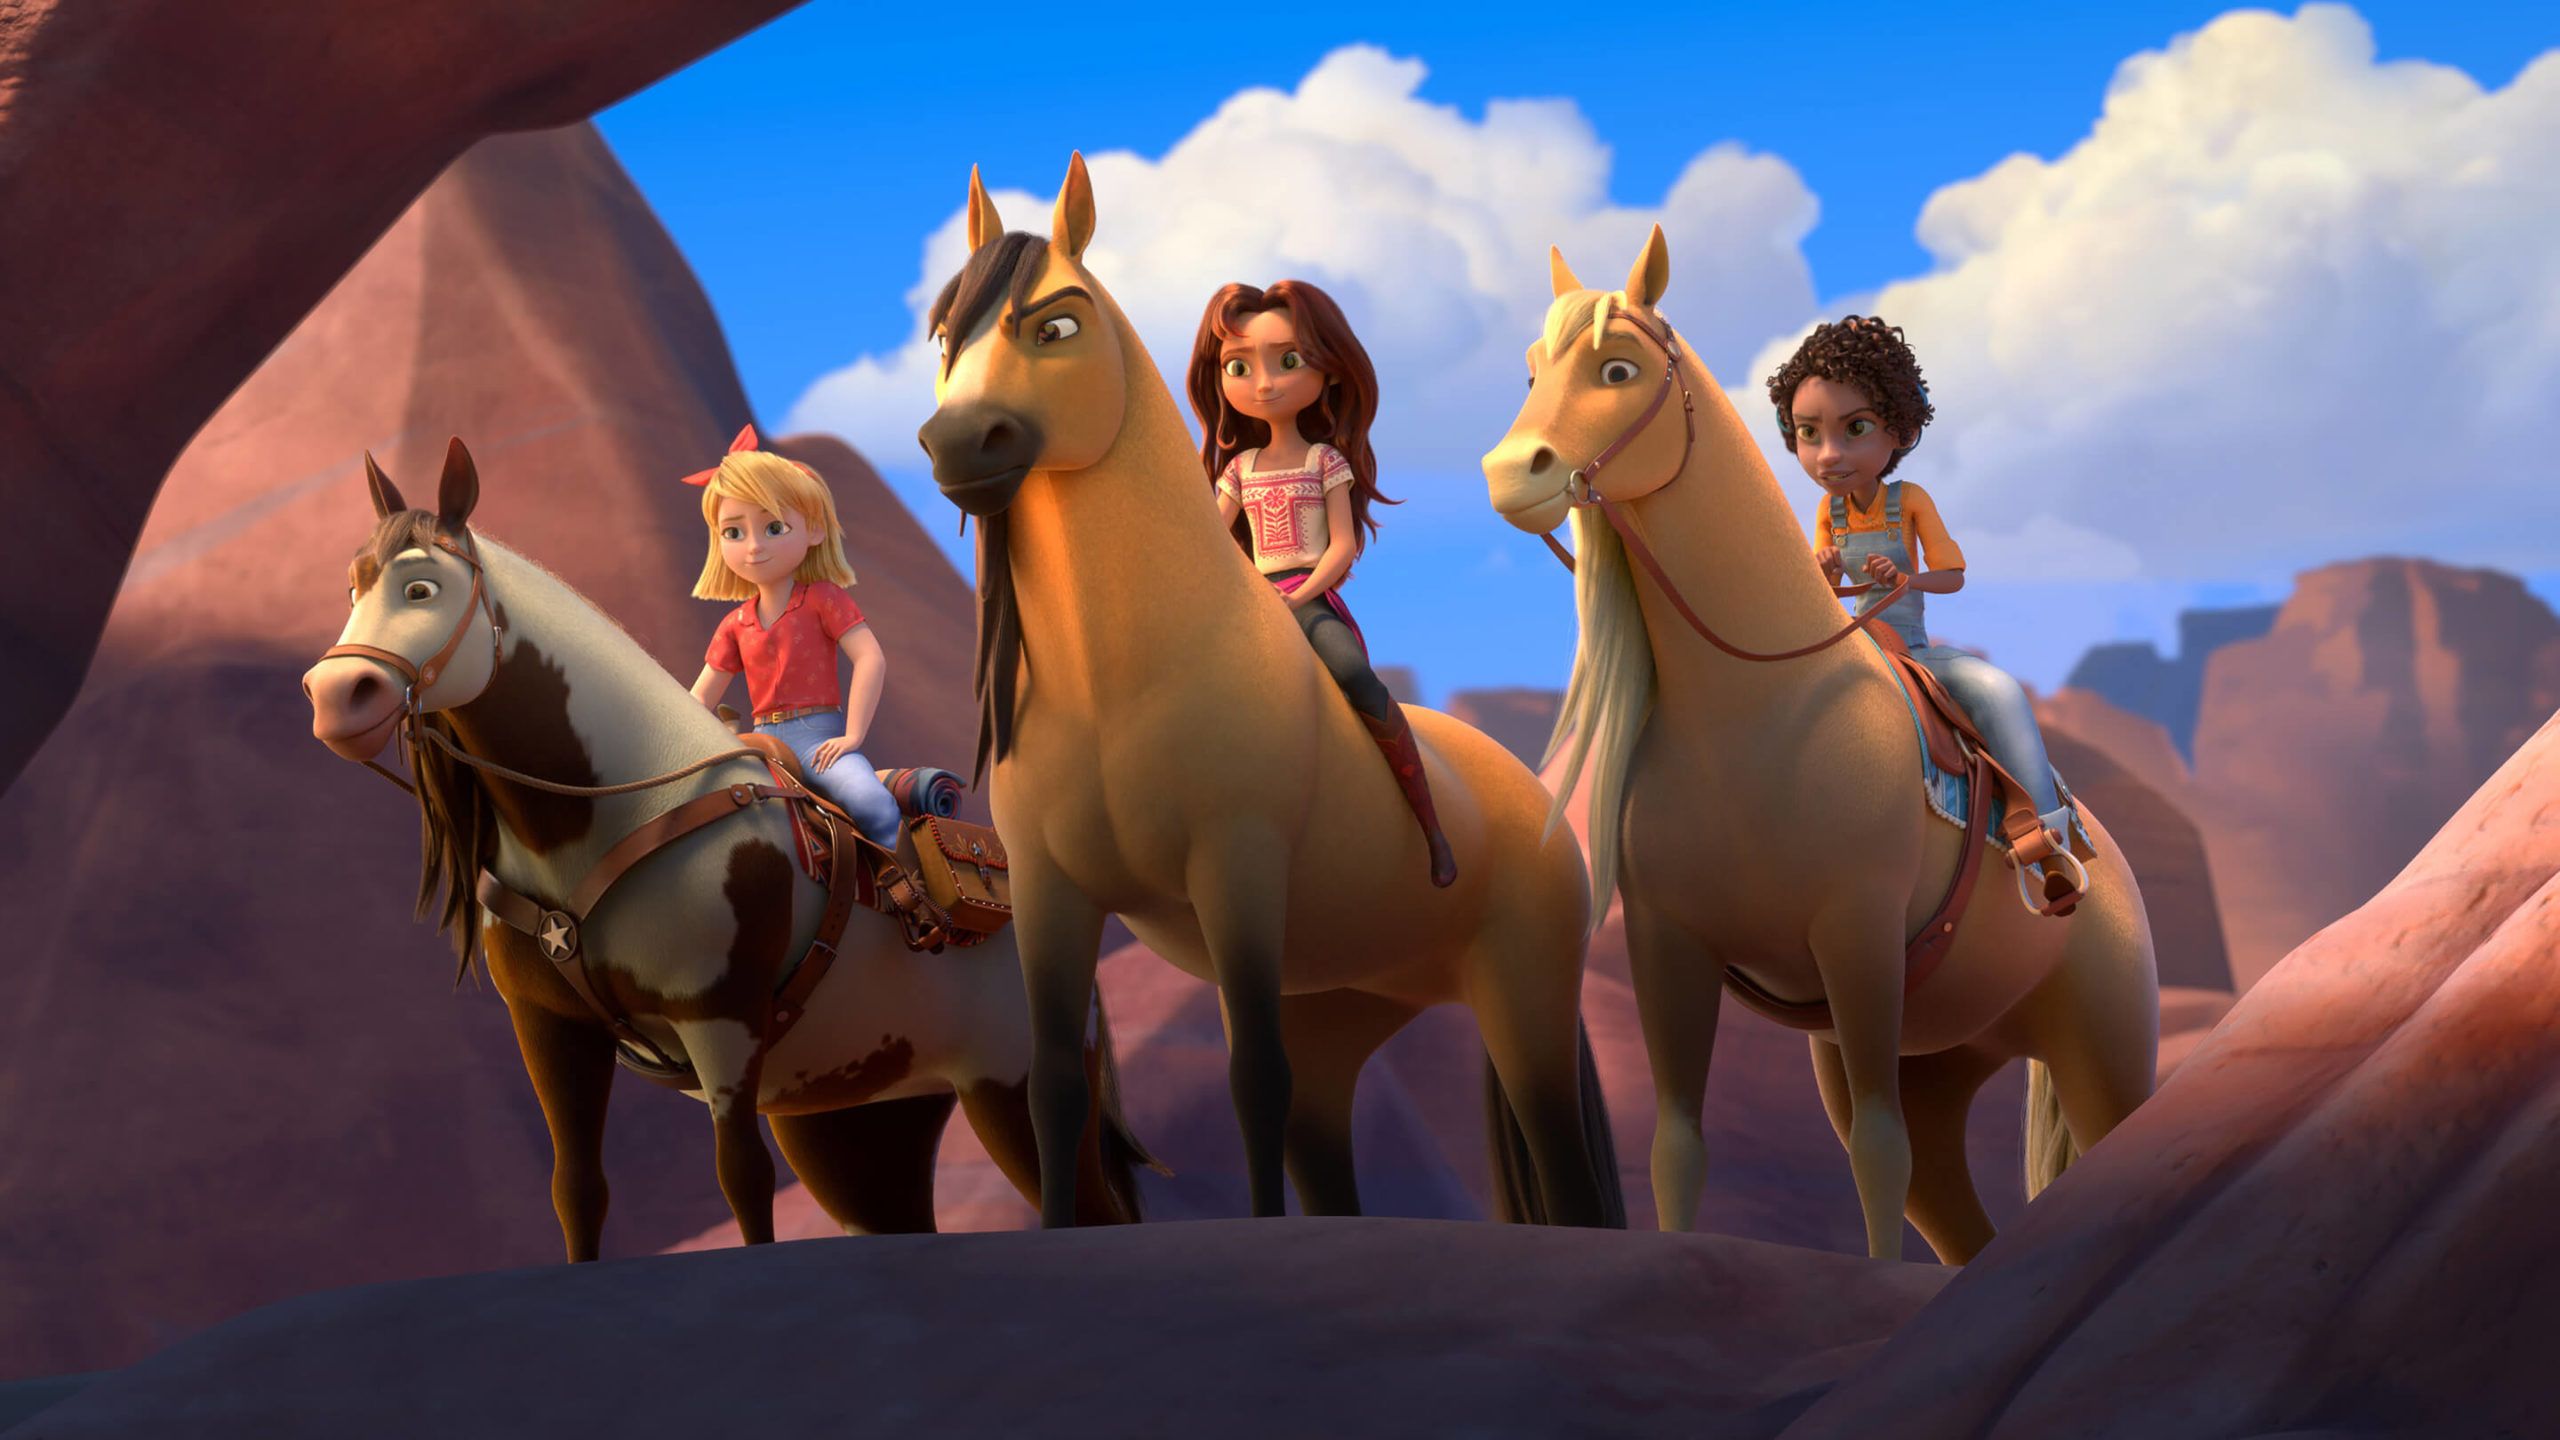 Spirit Untamed' Trailer: Julianne Moore, Jake Gyllenhaal, Eiza Gonzalez, & More Lend Their Voices To This Animated Feature